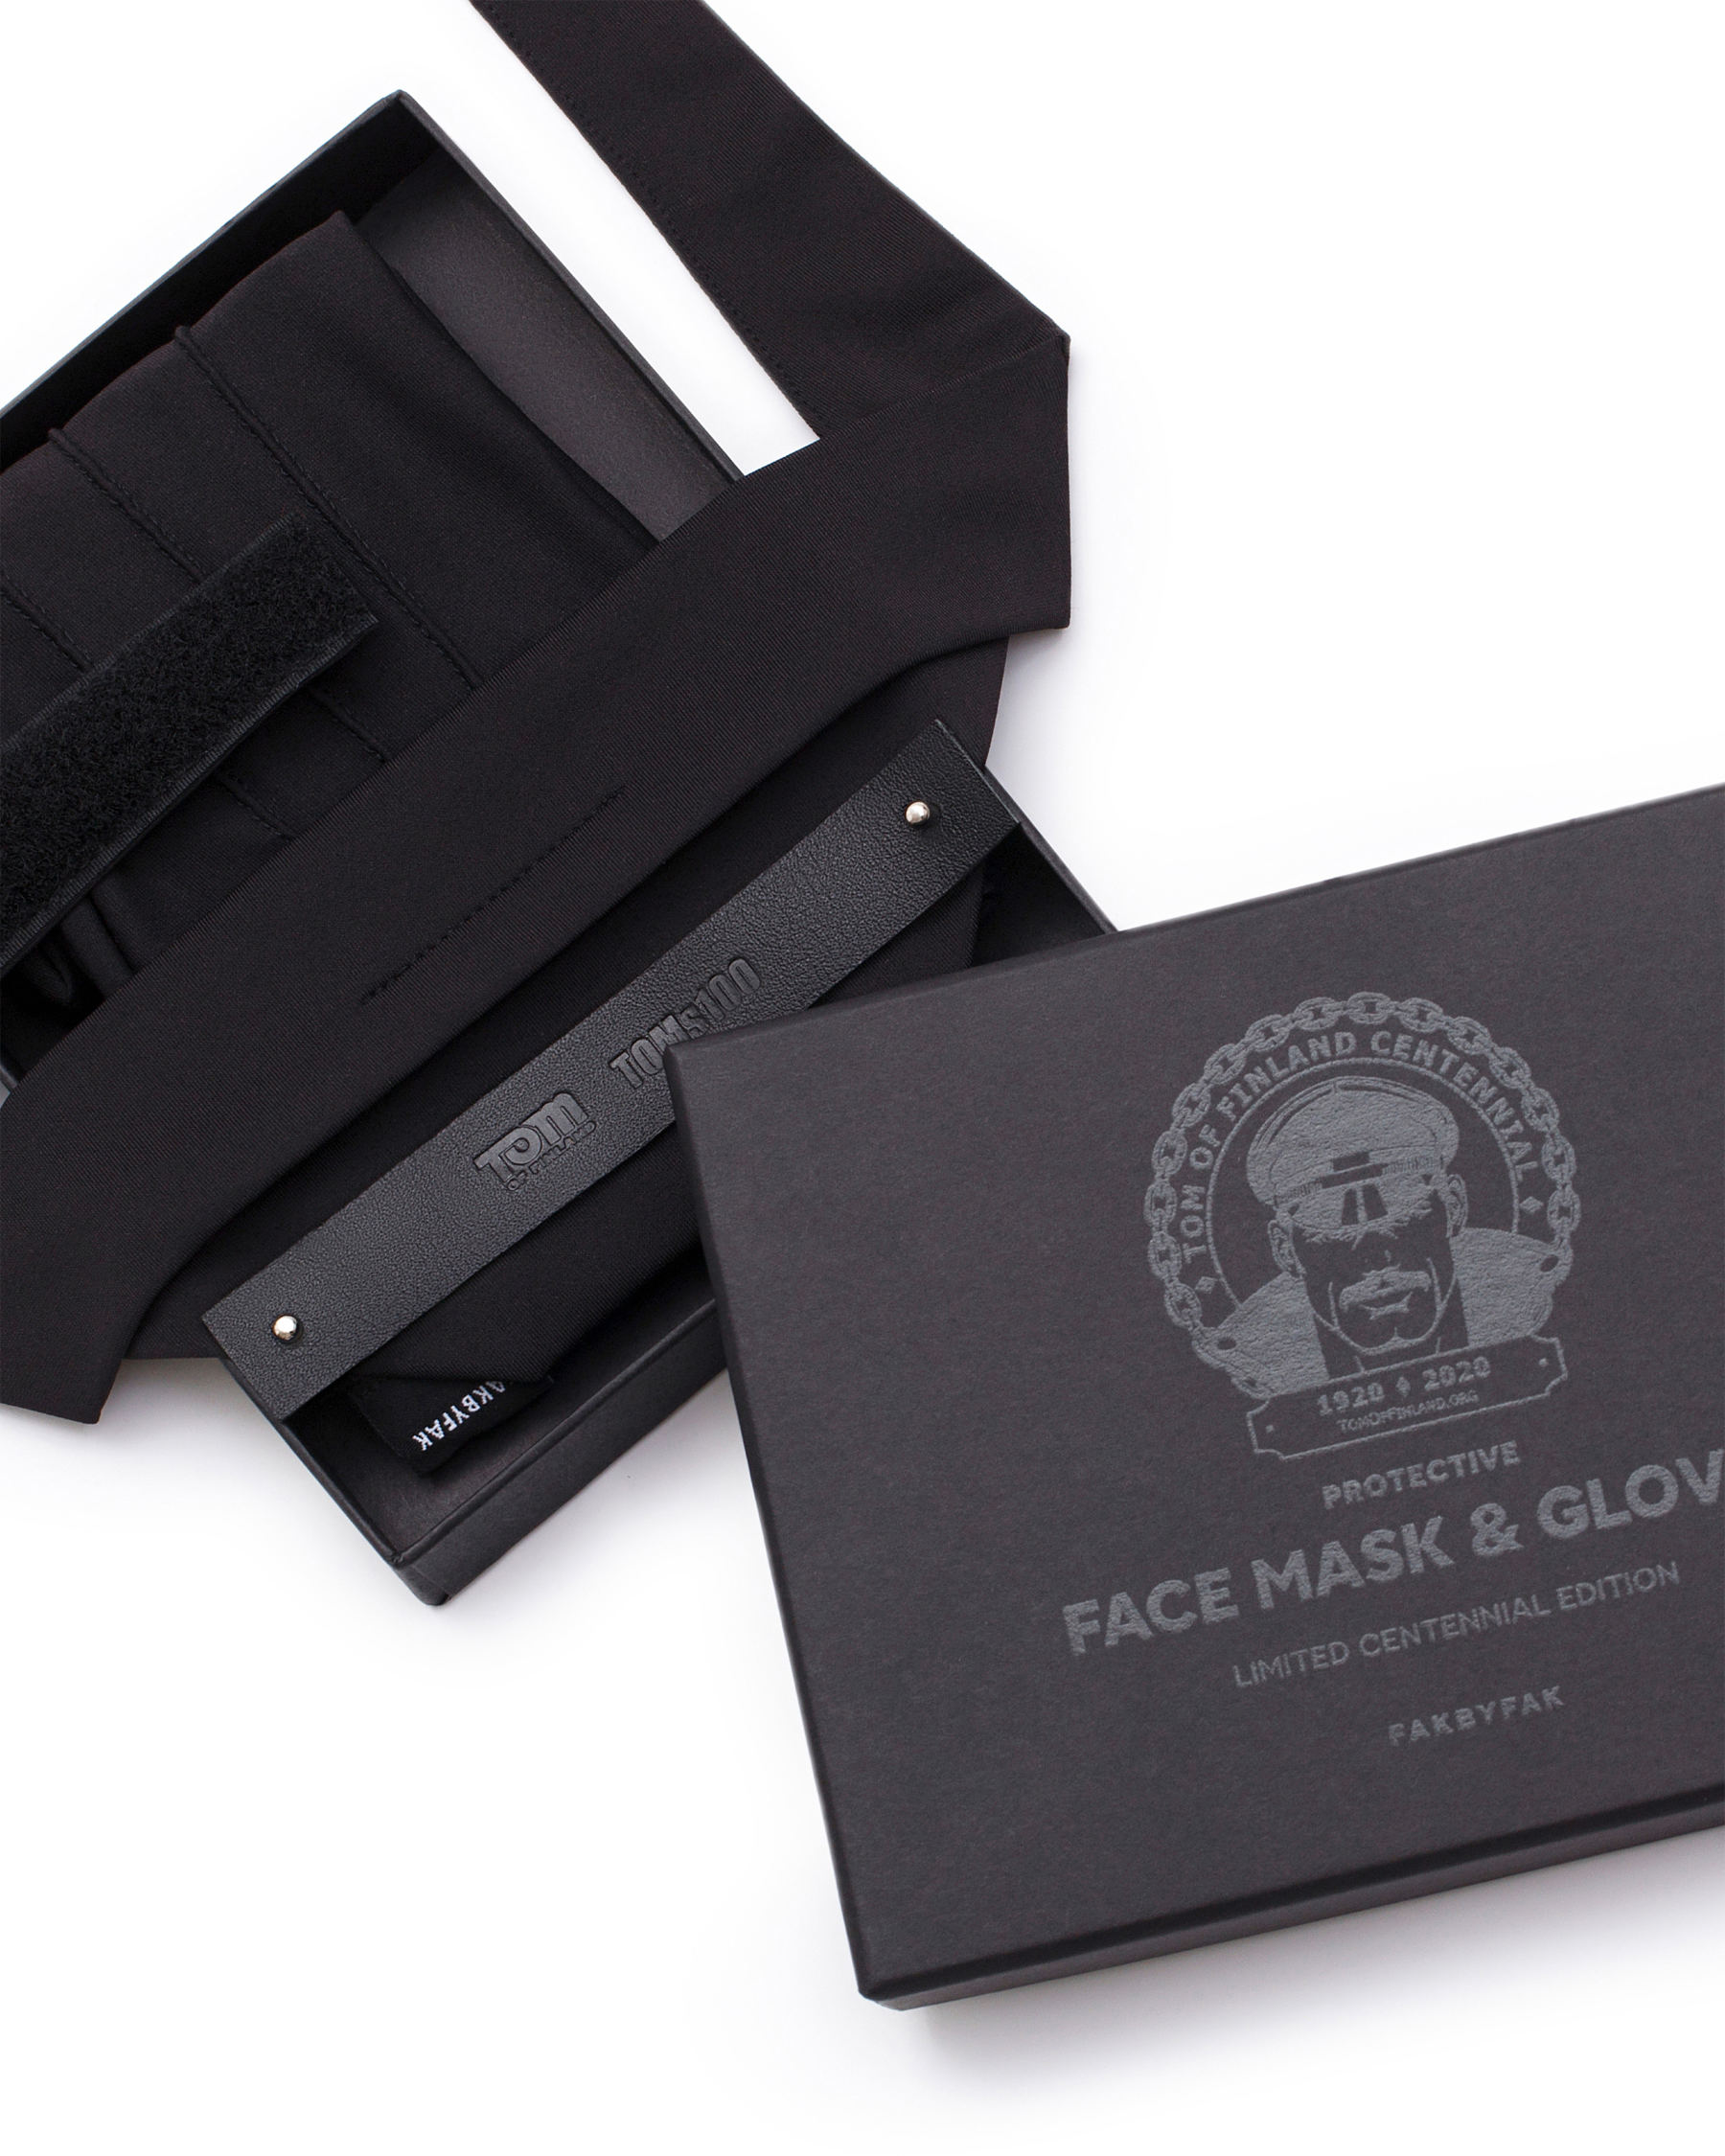 TOM OF FINLAND x FAKBYFAK  Fine Face Covering Mask & Gloves. Exclusive Centennial Edition Kit. Black Code: FBF-41103-01